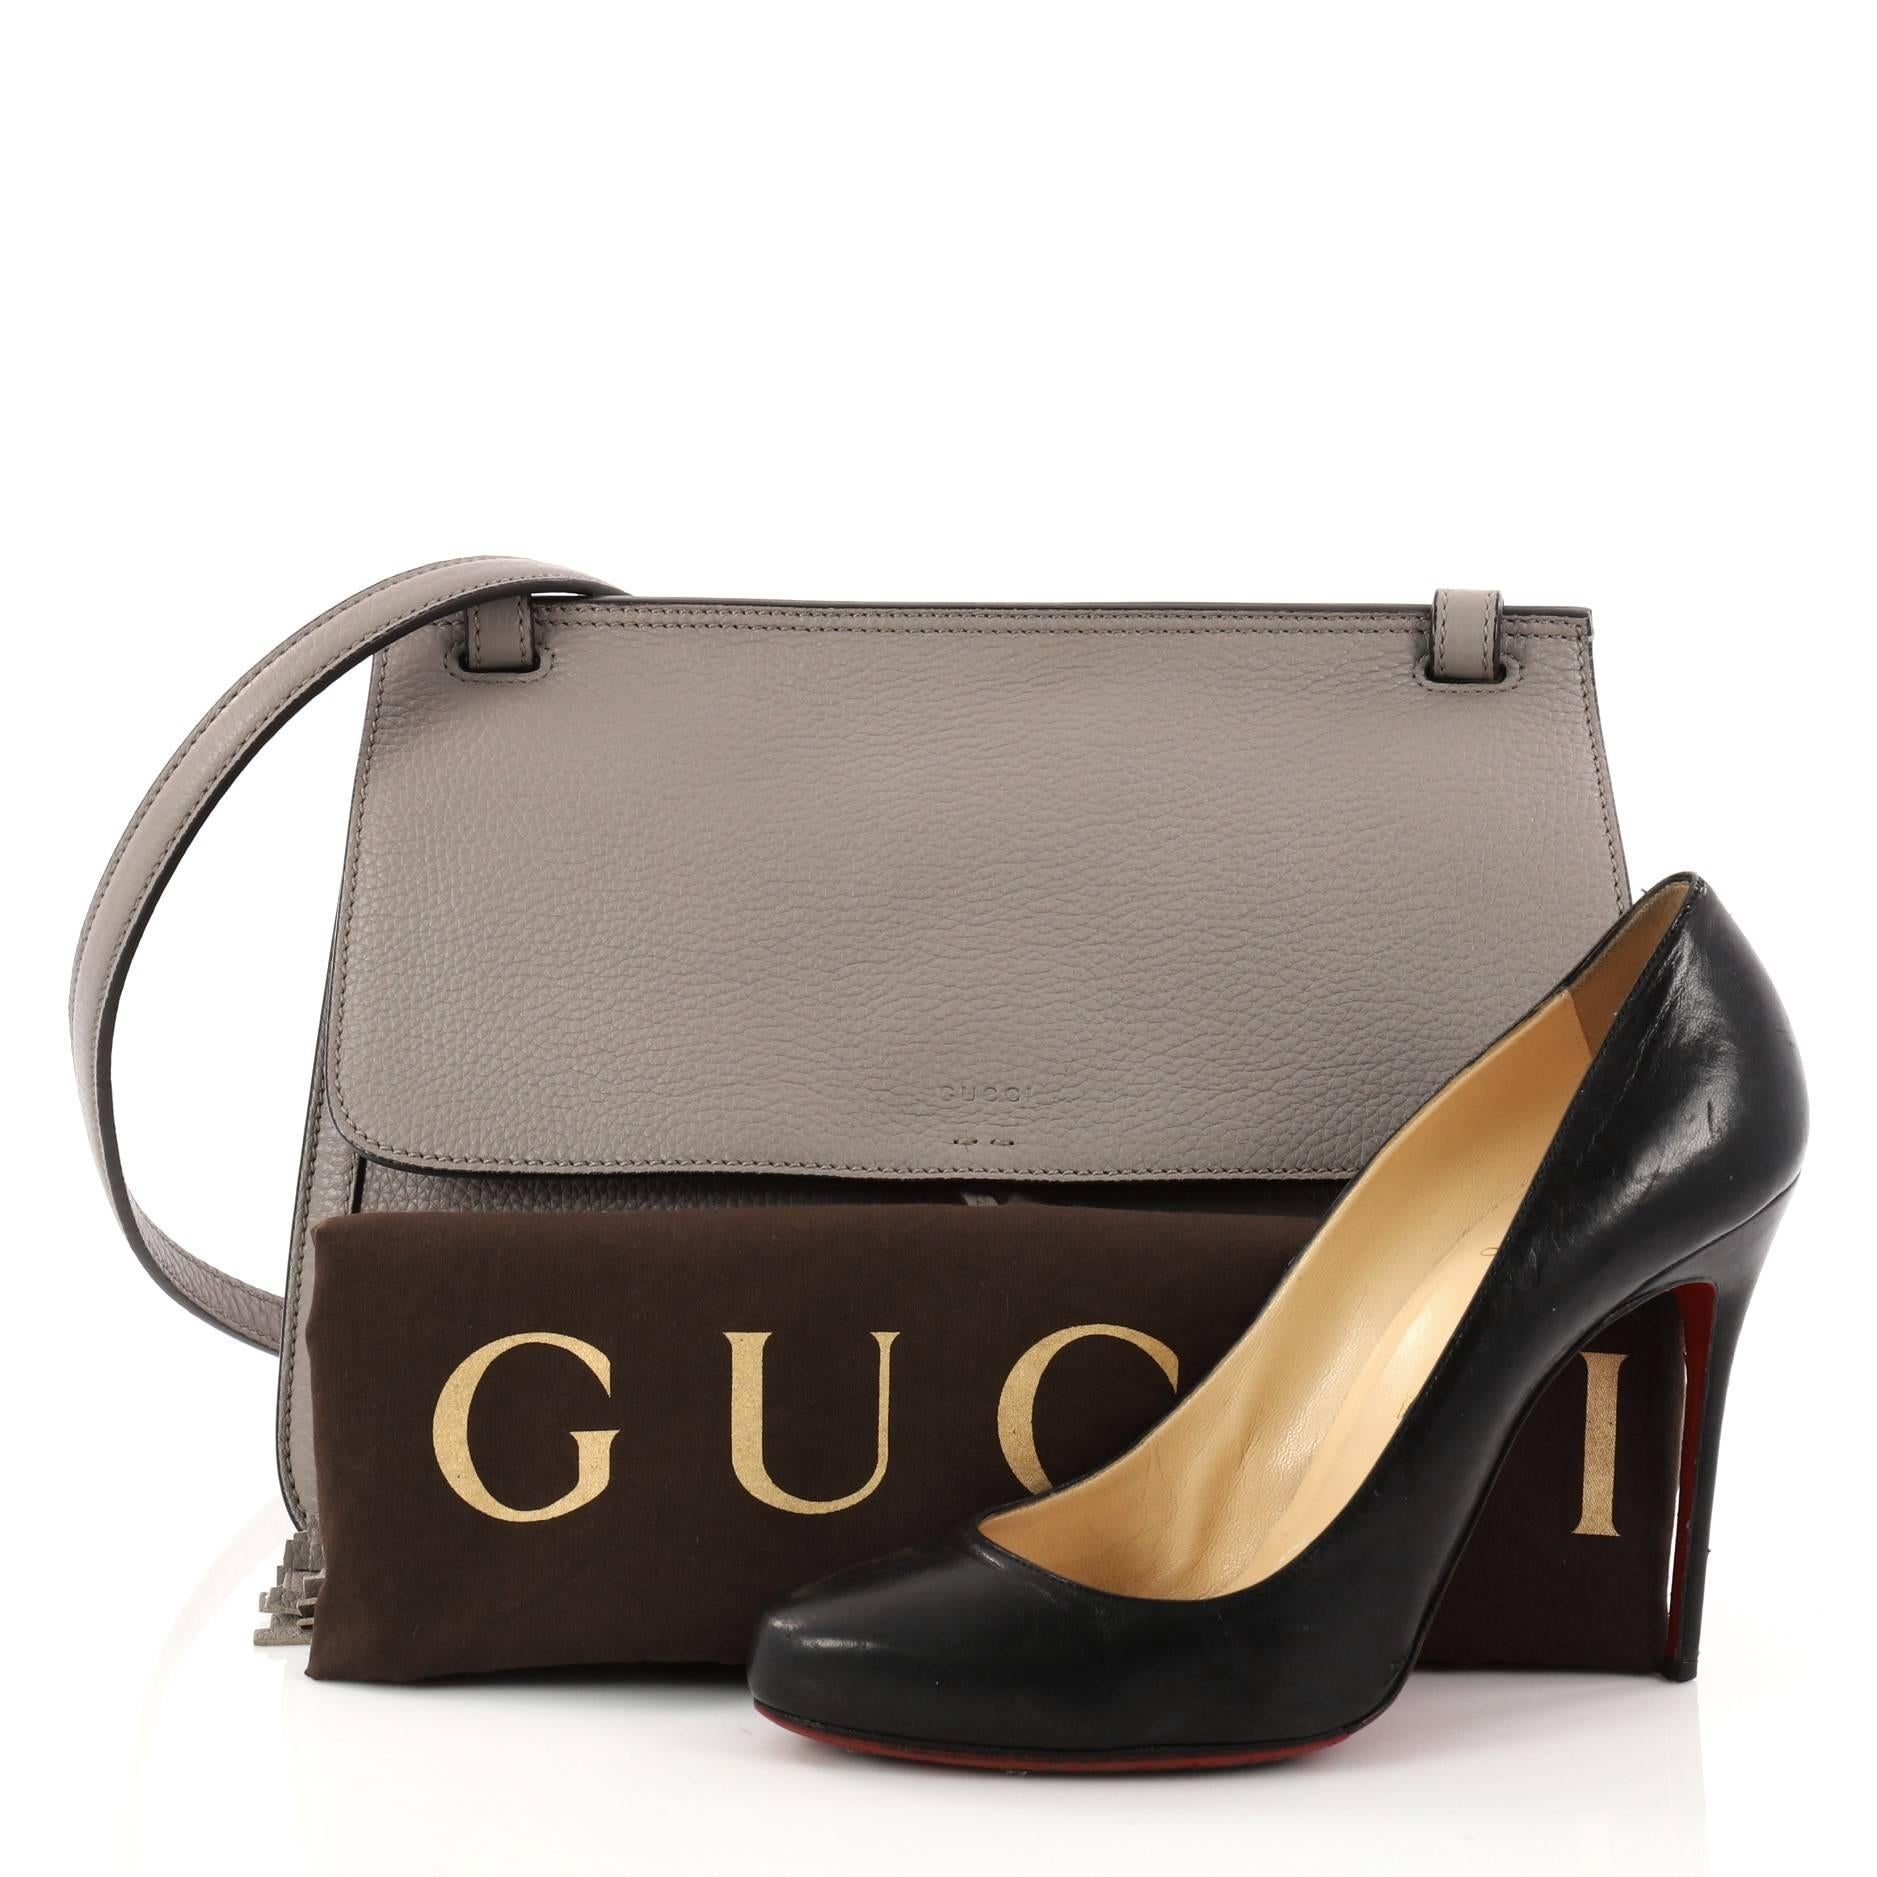 This authentic Gucci Bamboo Daily Flap Bag Leather is a simple yet elegant daily crossbody bag for on-the-go woman. Crafted in grey leather, this easy-chic bag features frontal flap with bamboo tassel fringes, adjustable leather strap, subtle Gucci